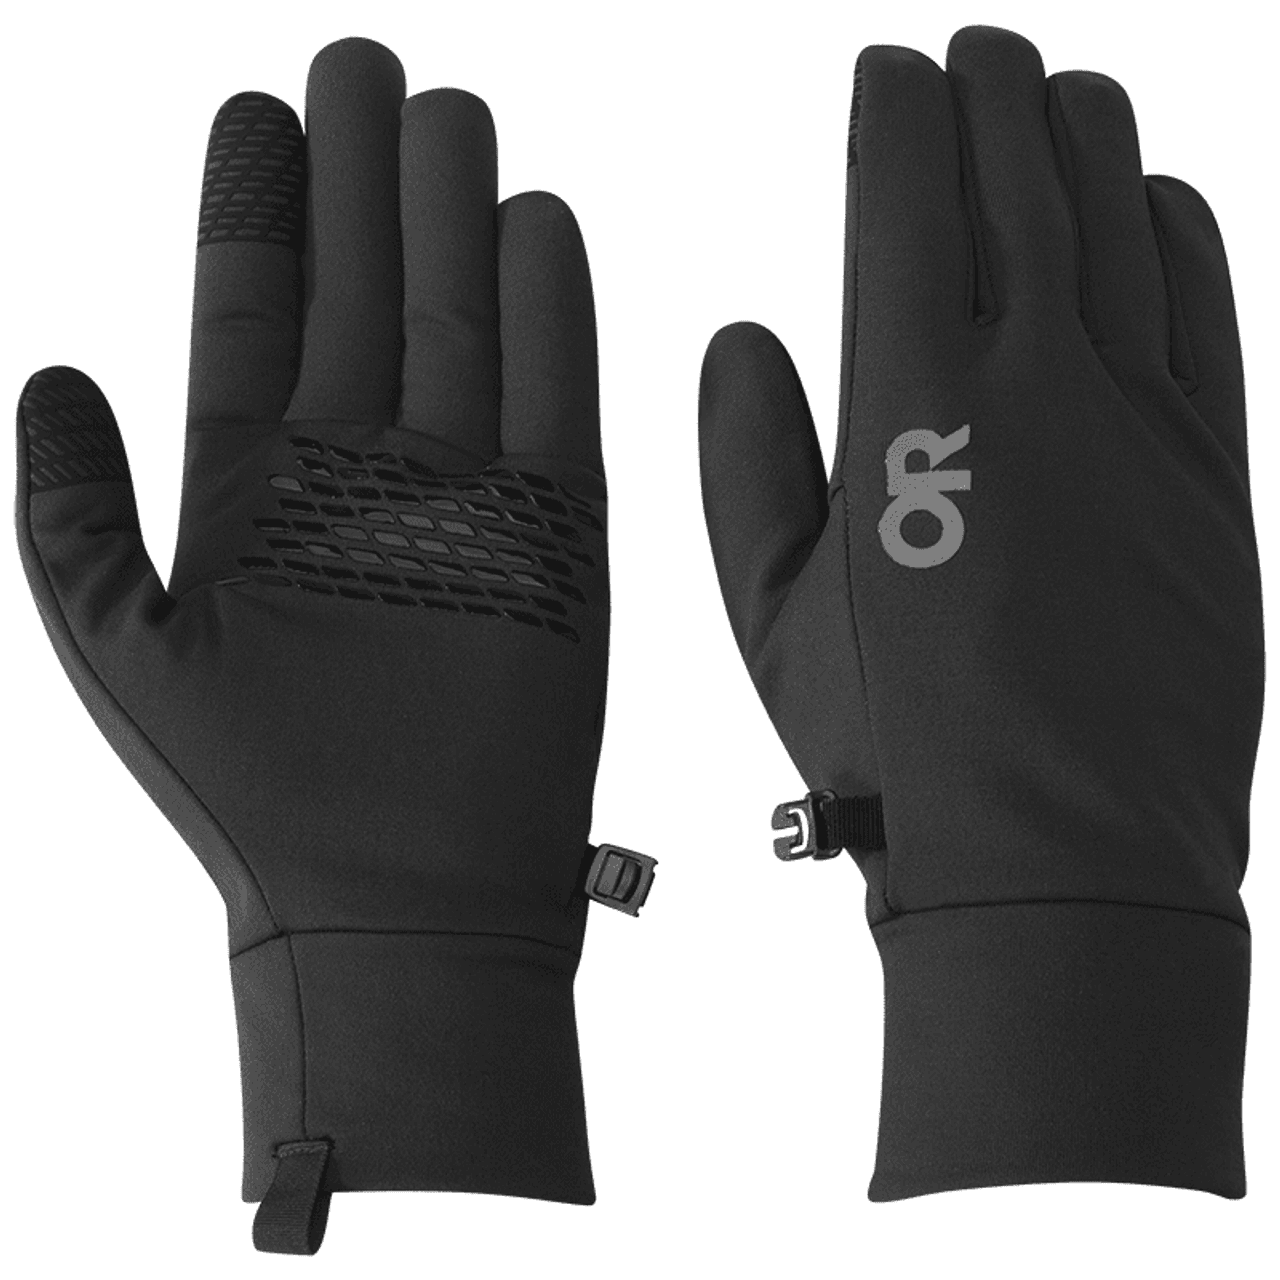 Outdoor Research Midweight Glove Liner